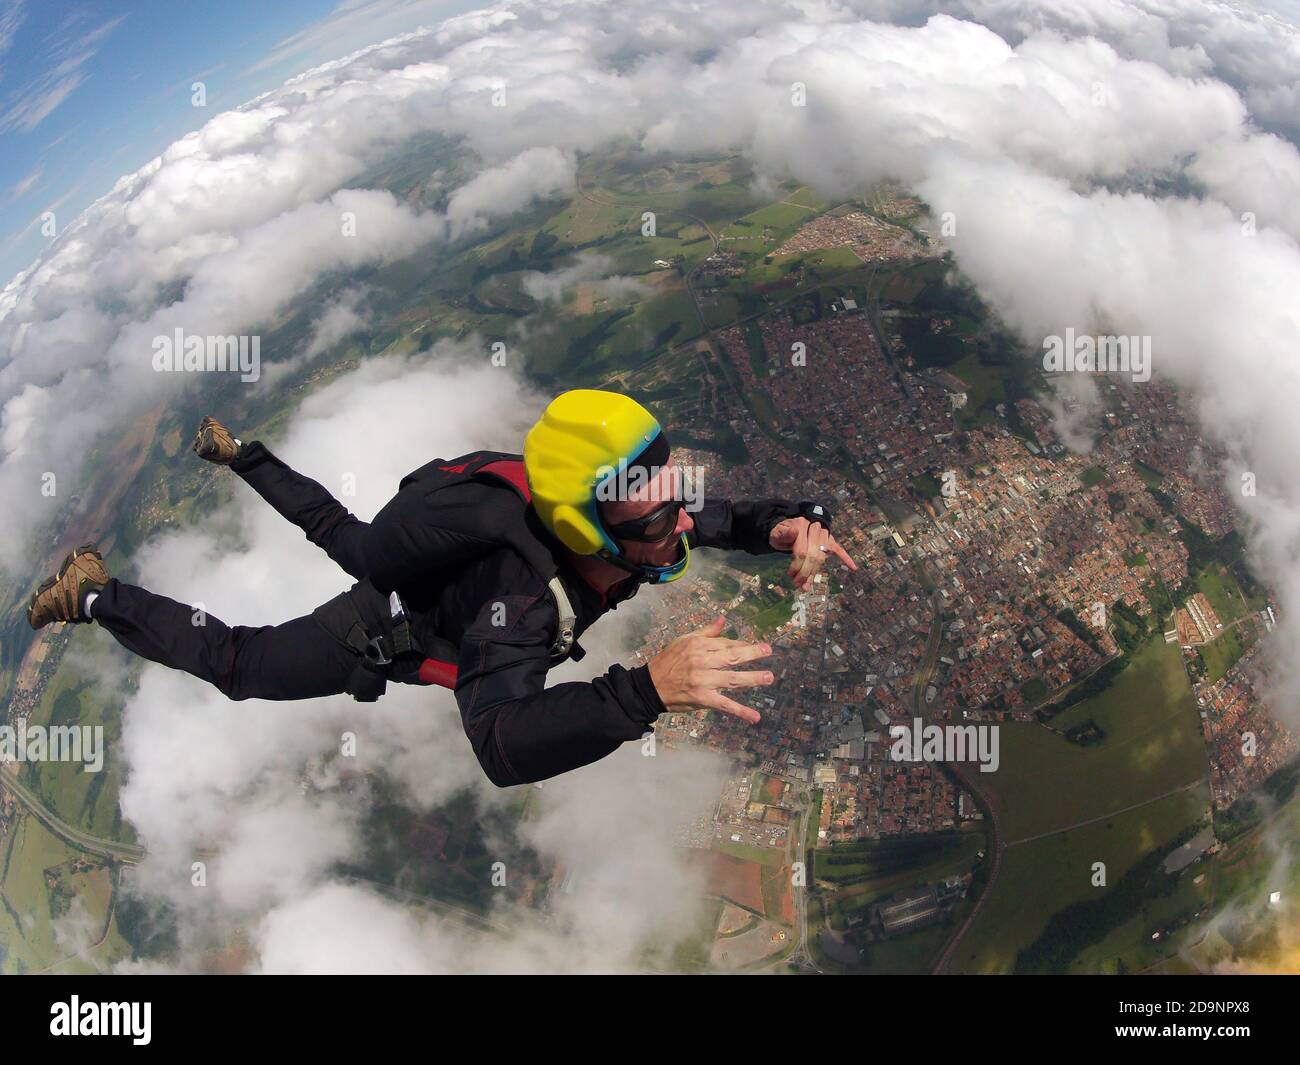 Skydiving point of view Stock Photo